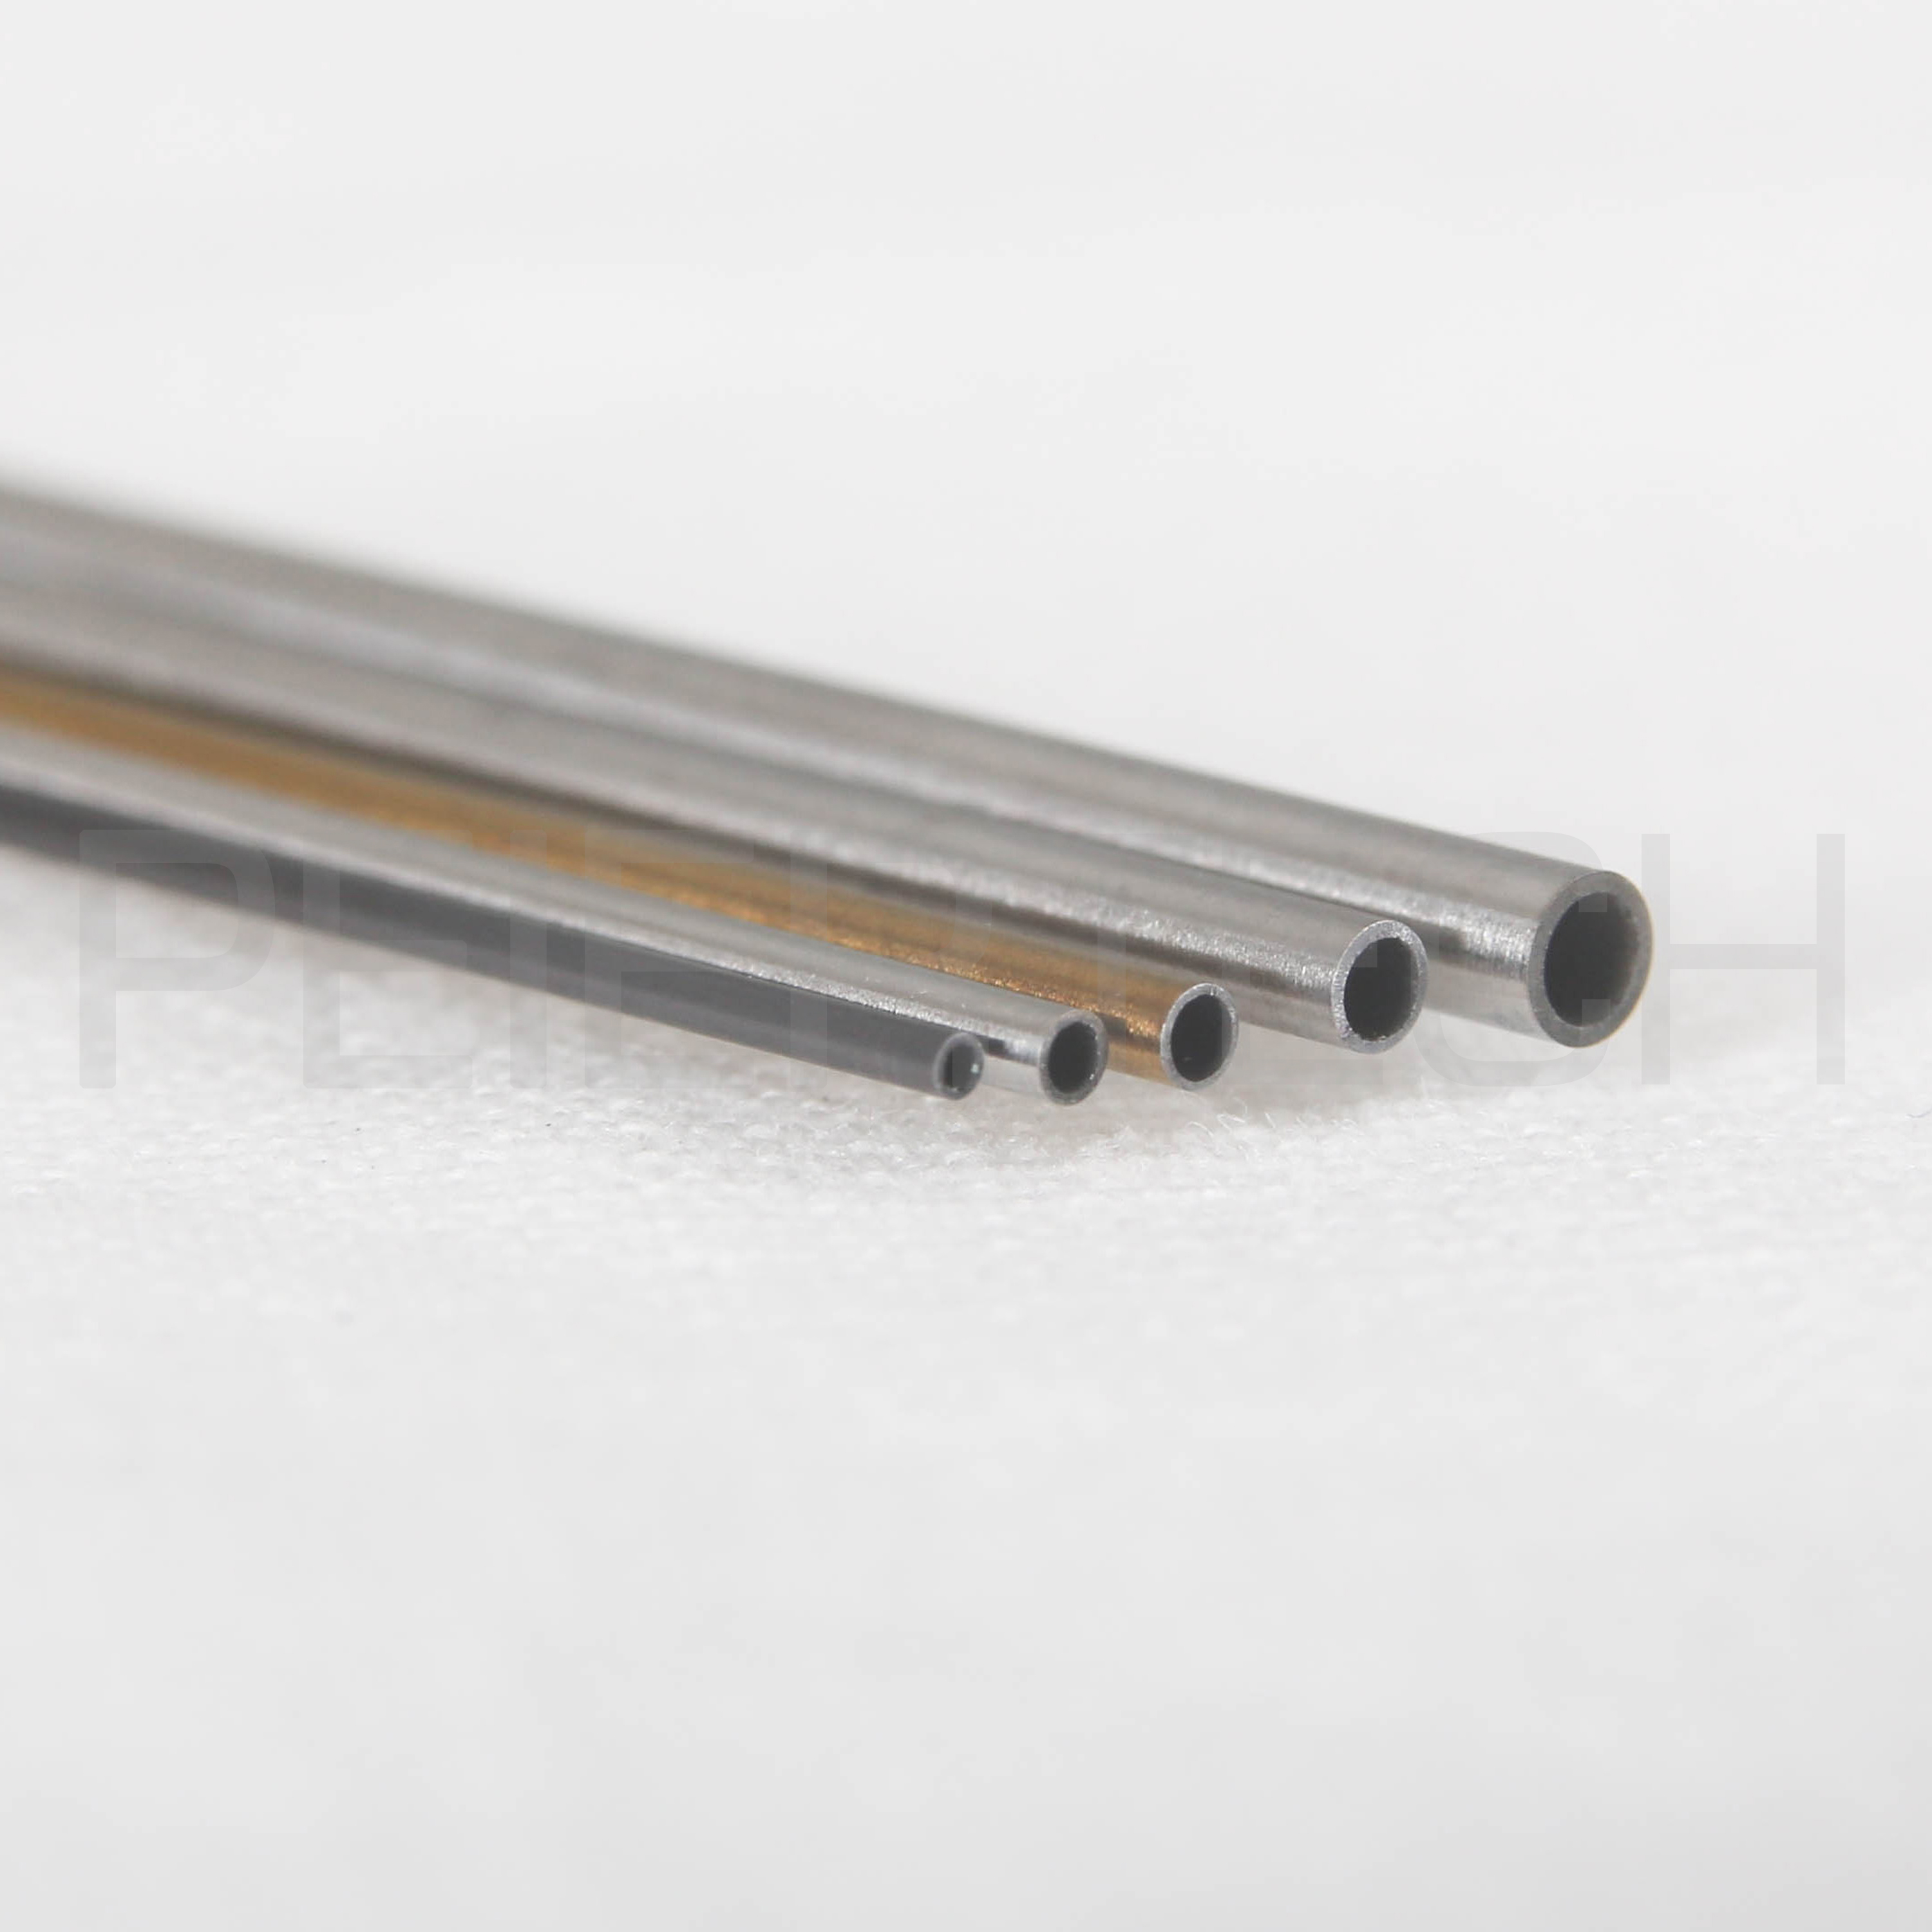 Nitinol Tube - Superelastic Tube for Medical Device and Implants